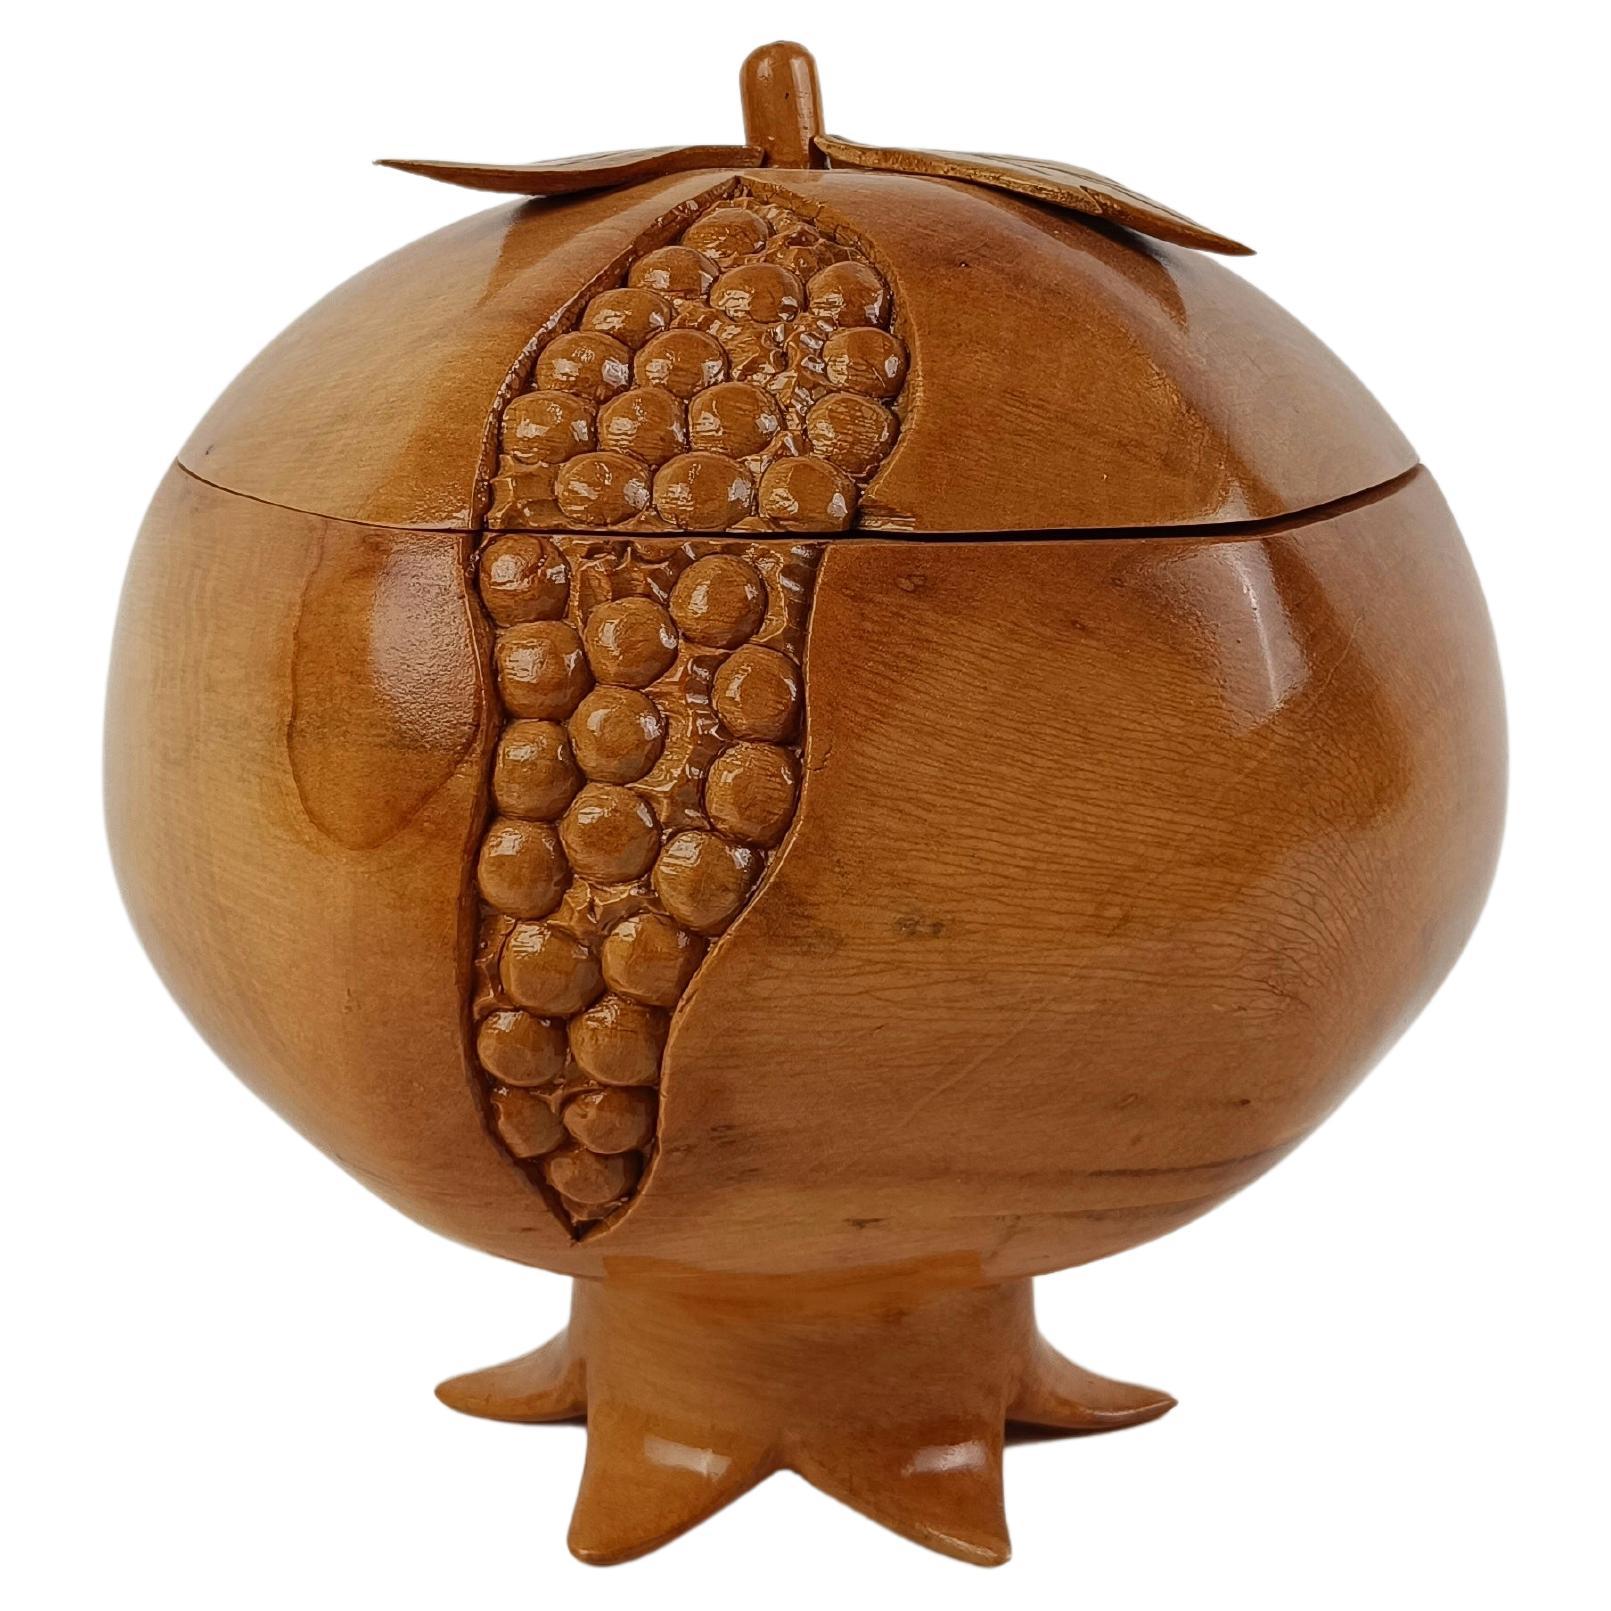 Sculptural Vintage Ice Bucket in maple wood carved in the shape of a pomegranate